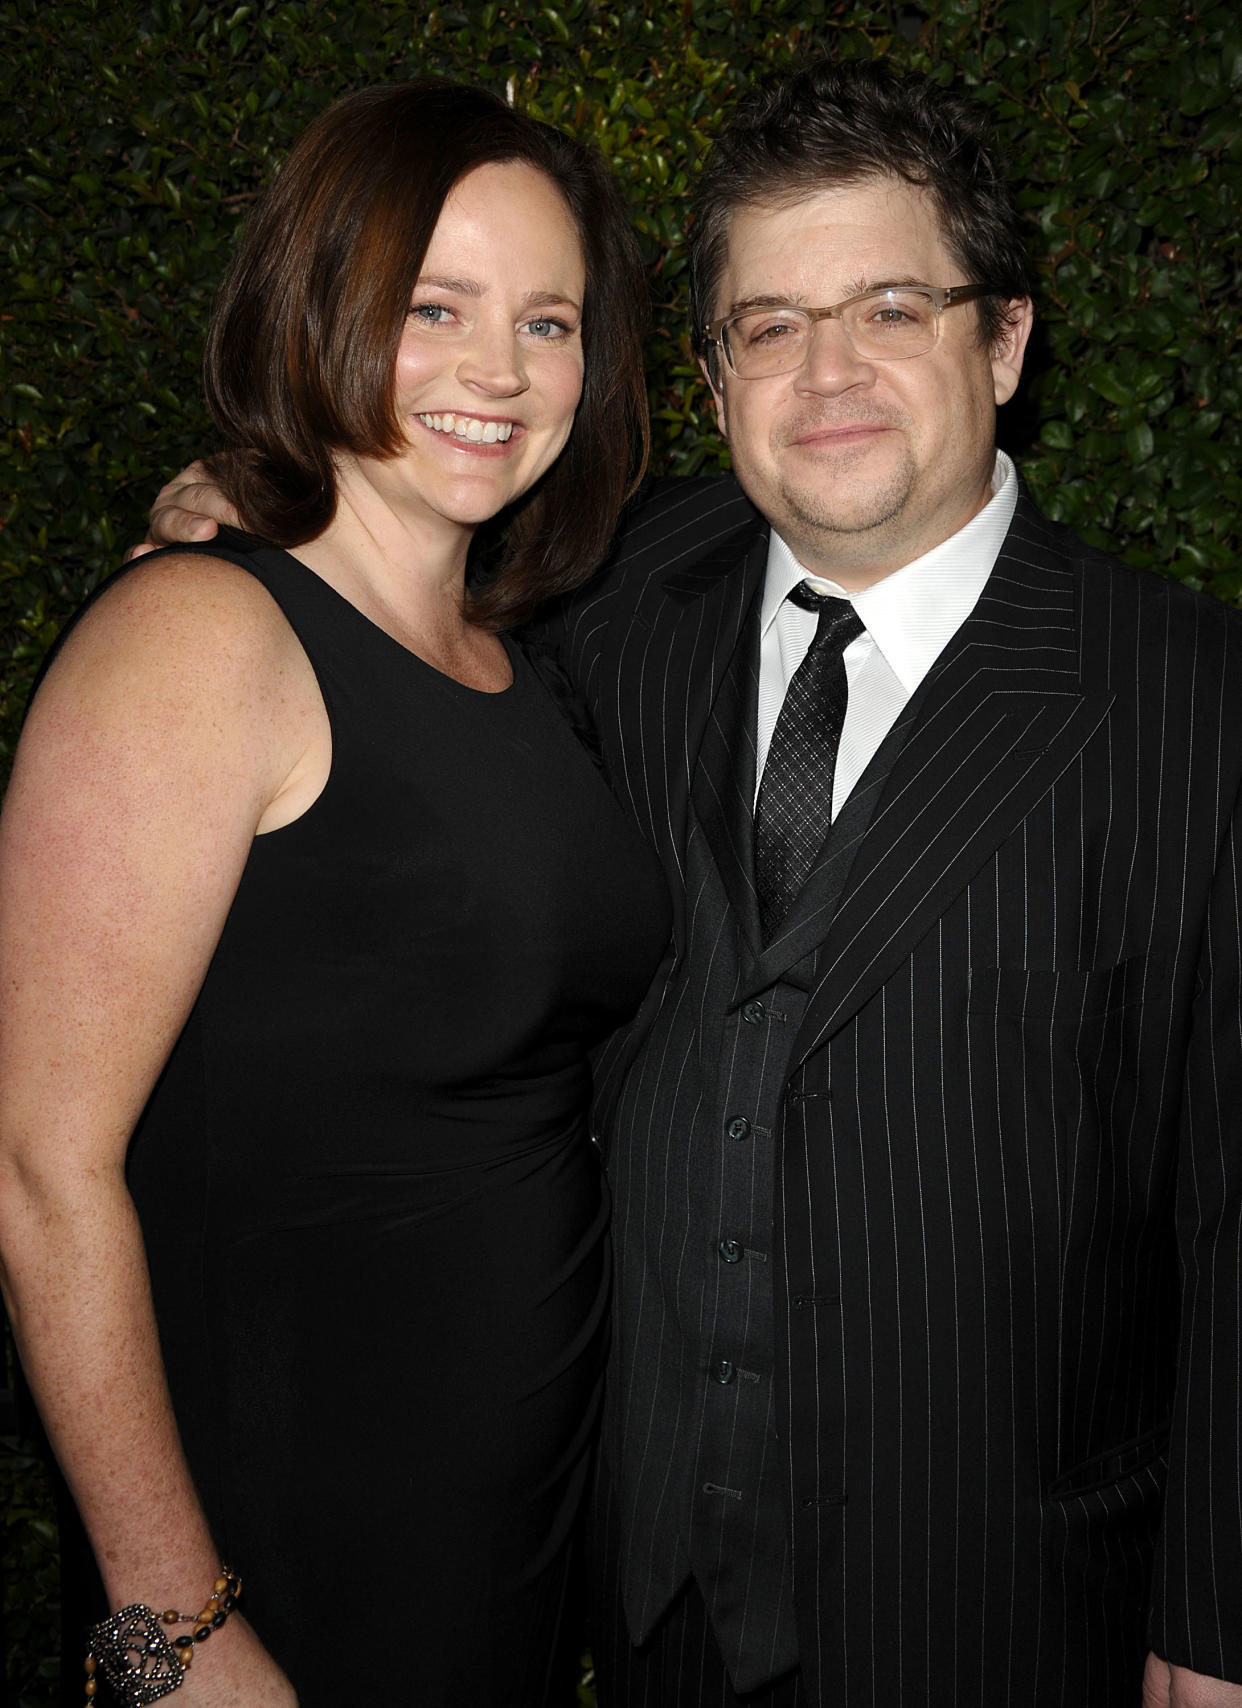 Michelle McNamara and Patton Oswalt attend the <em>Young Adult</em> Los Angeles premiere in December 2011. (Photo: Getty Images)